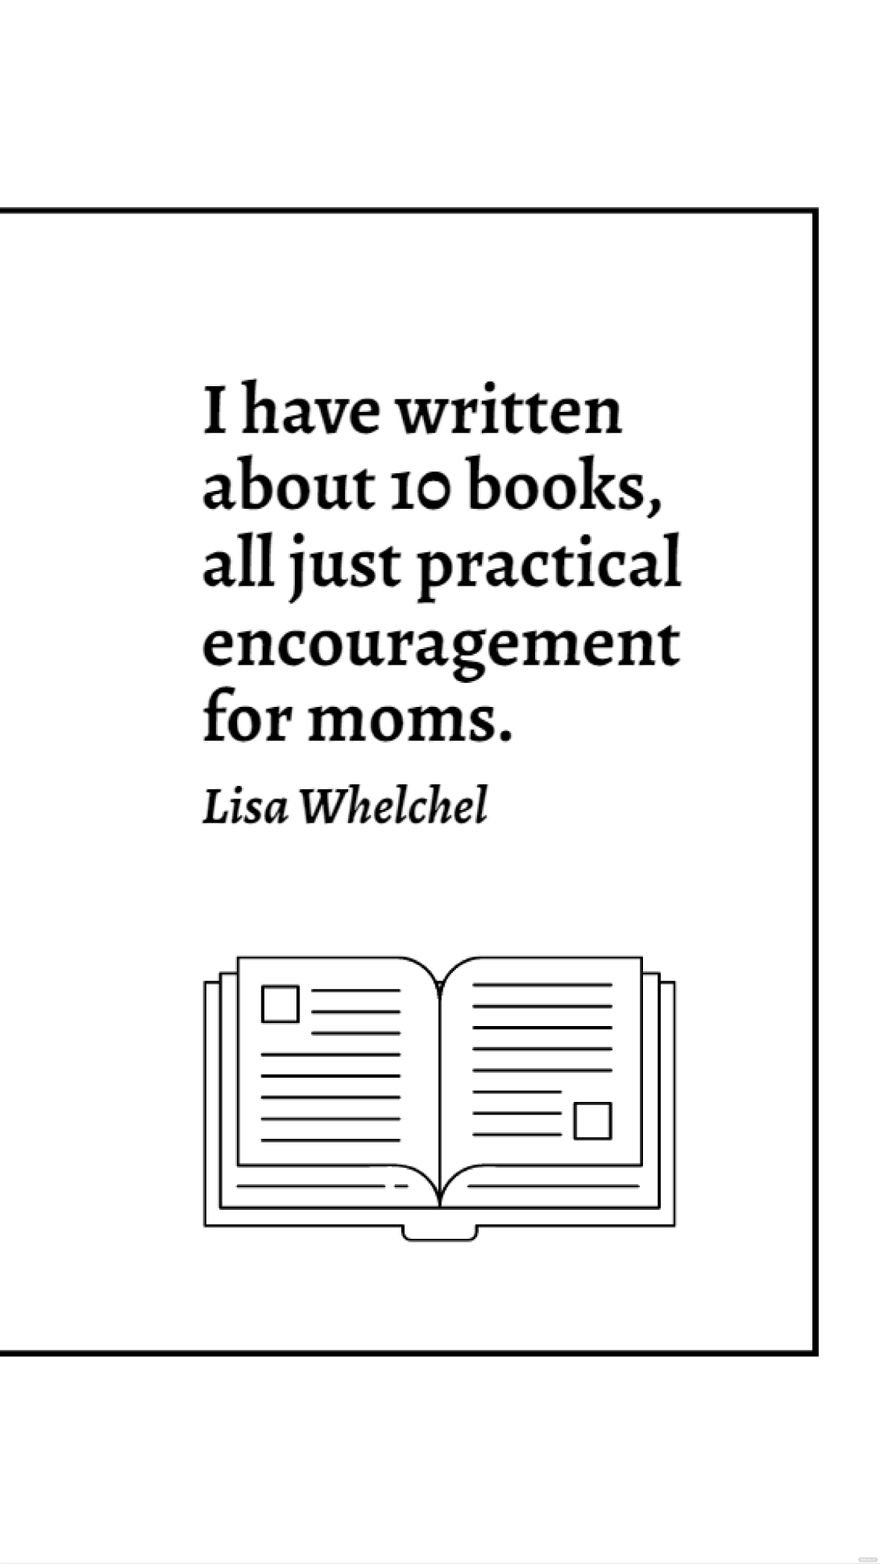 Free Lisa Whelchel - I have written about 10 books, all just practical encouragement for moms. in JPG